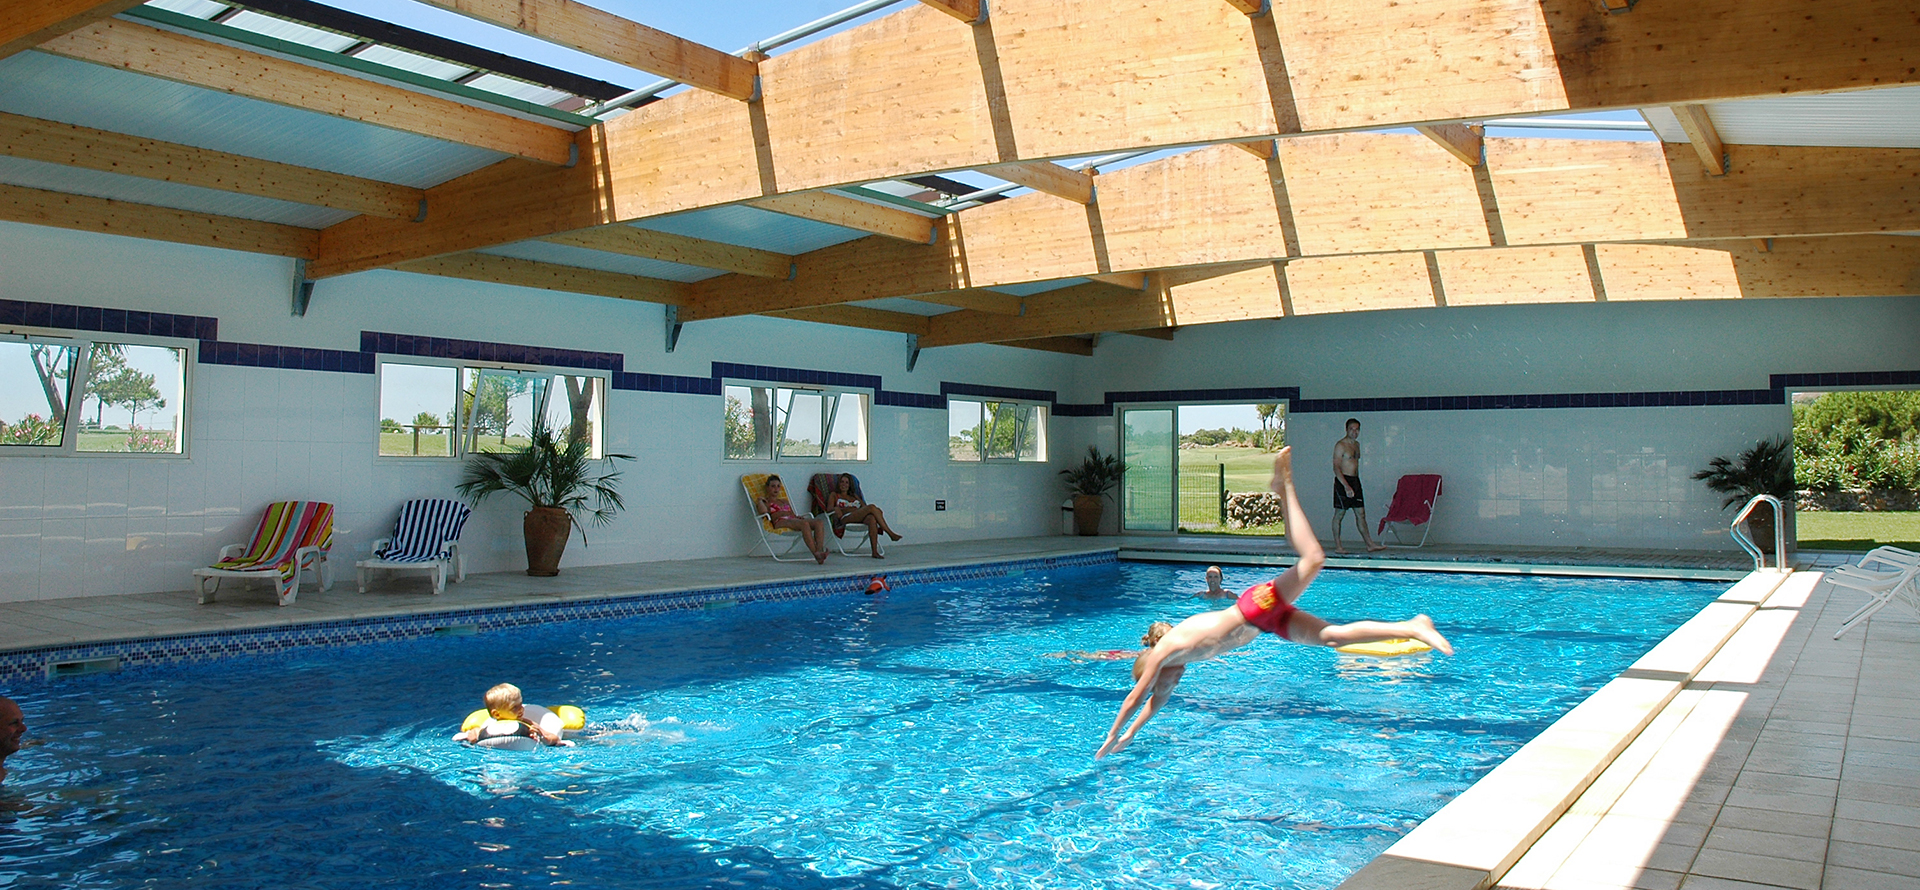 View of the indoor pool at the Palmyra Golf hotel in Cap d’Agde